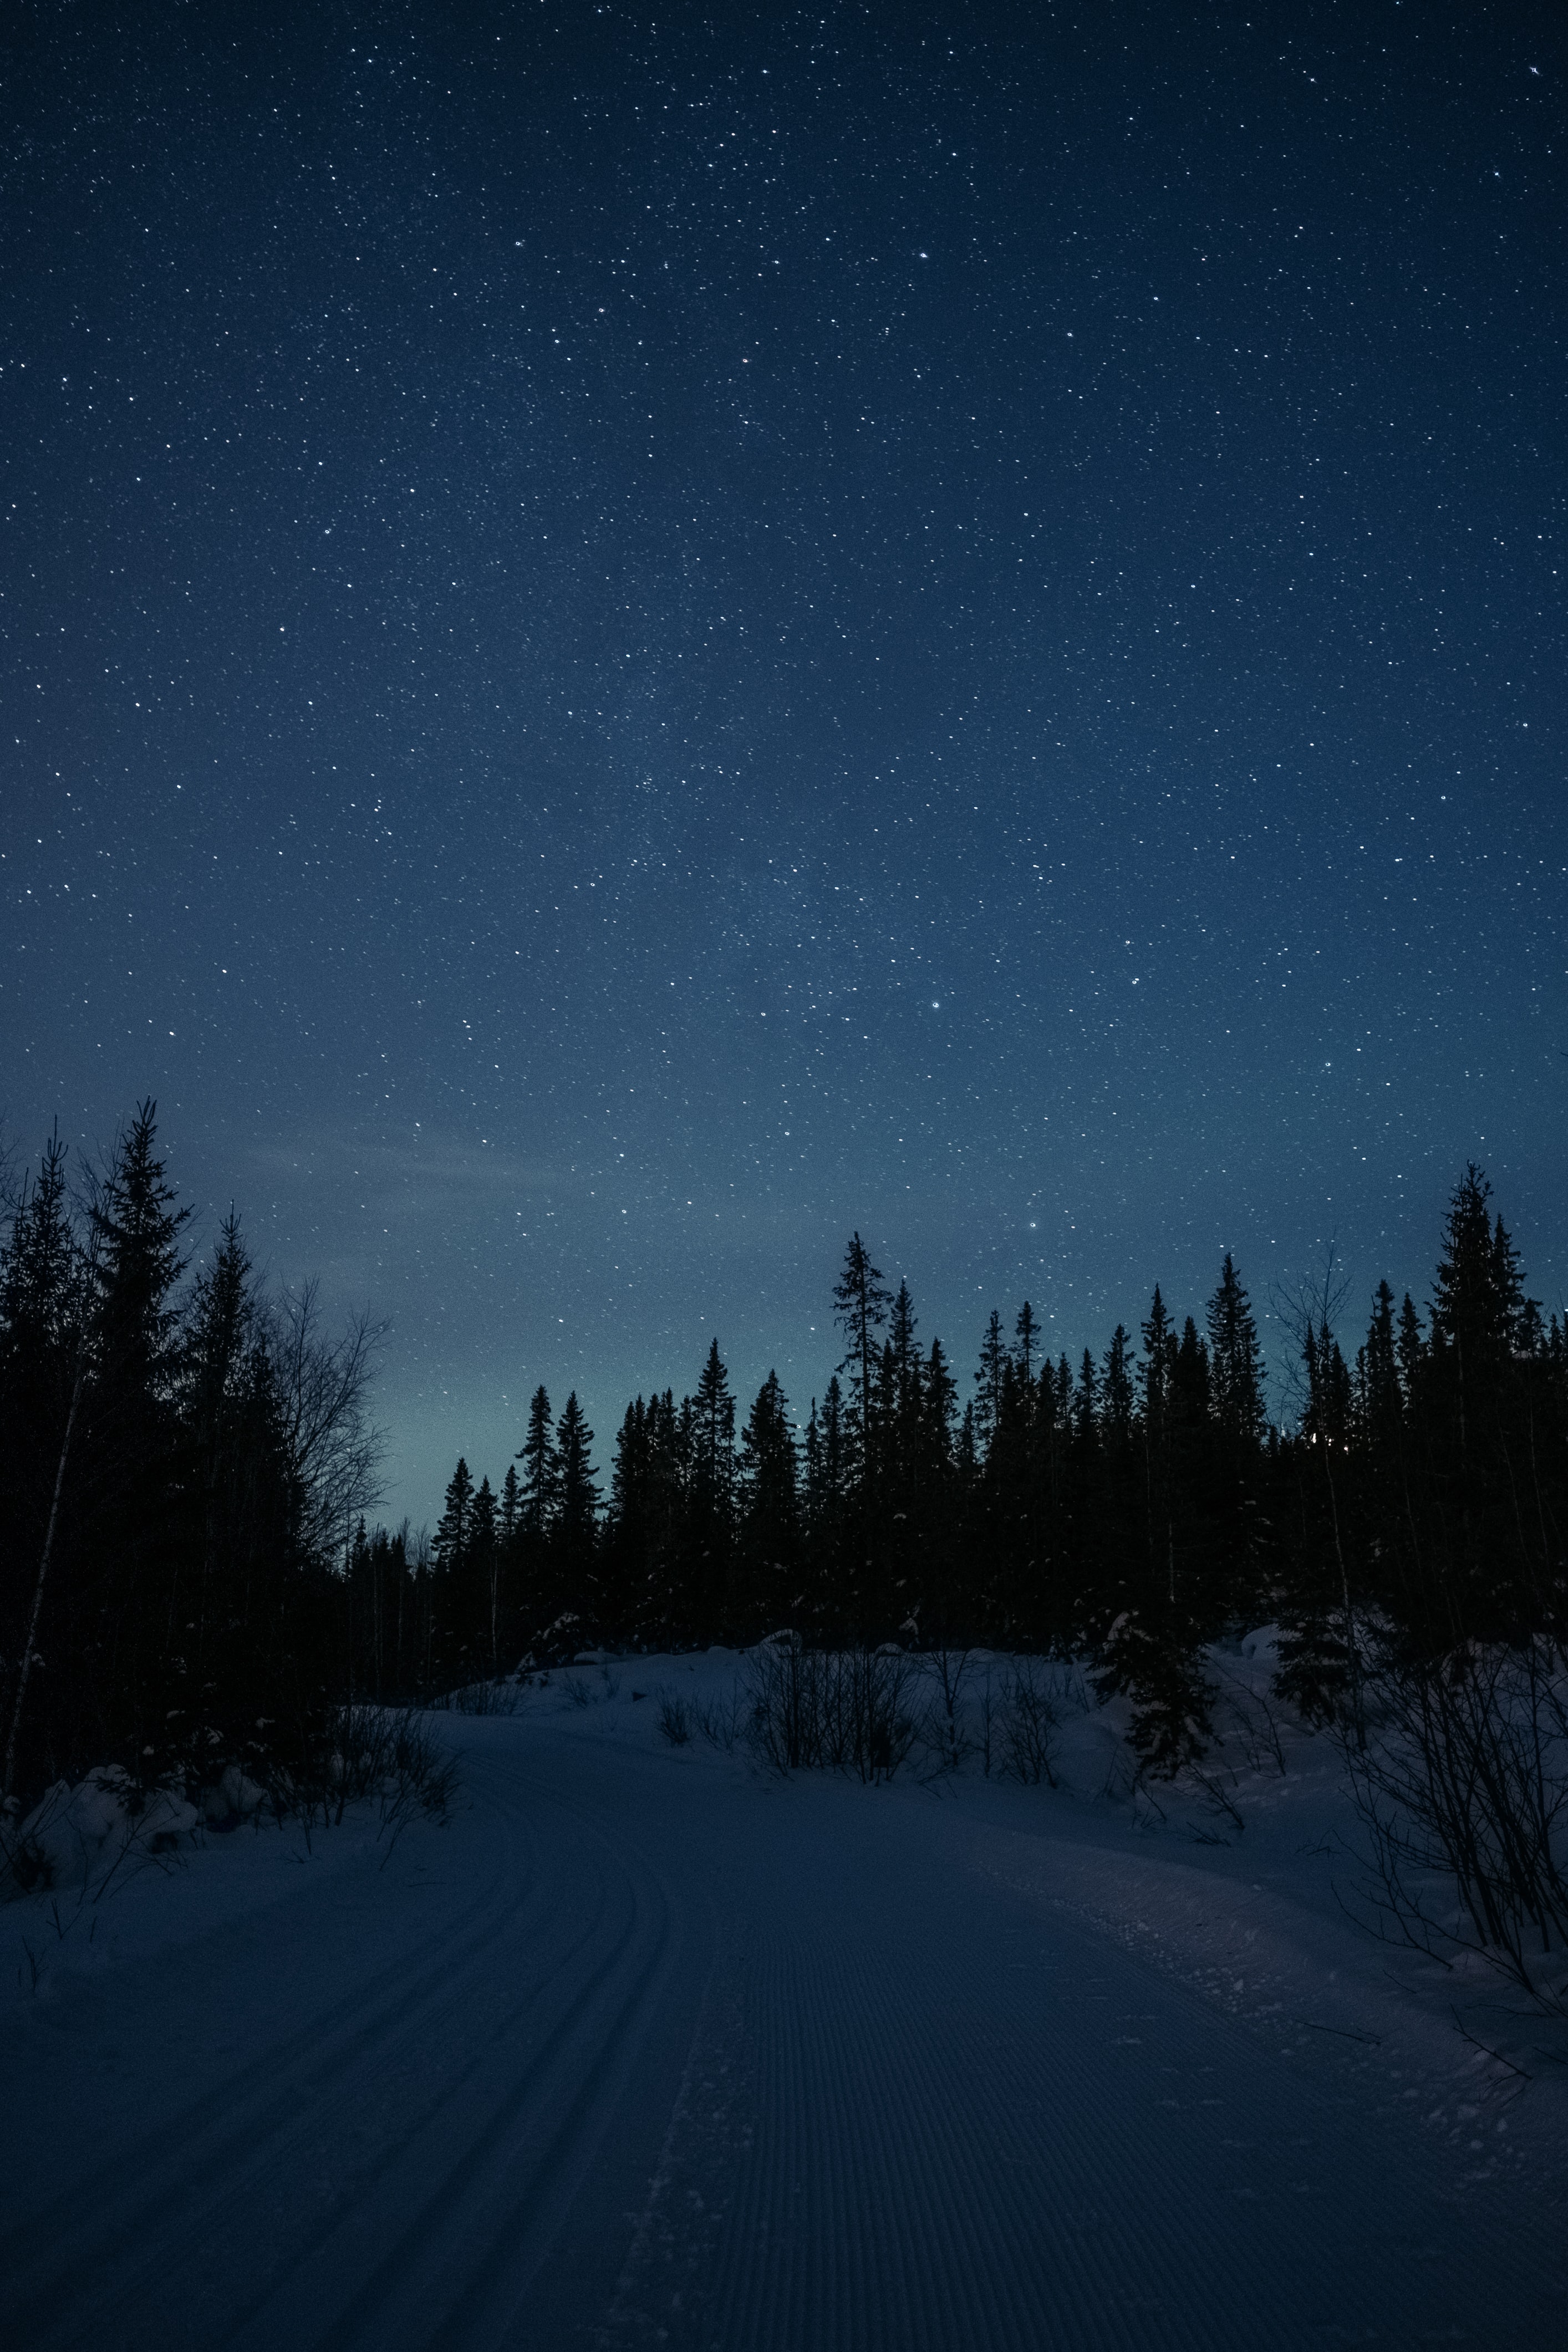 57915 download wallpaper night, winter, nature, stars, snow, road, forest screensavers and pictures for free